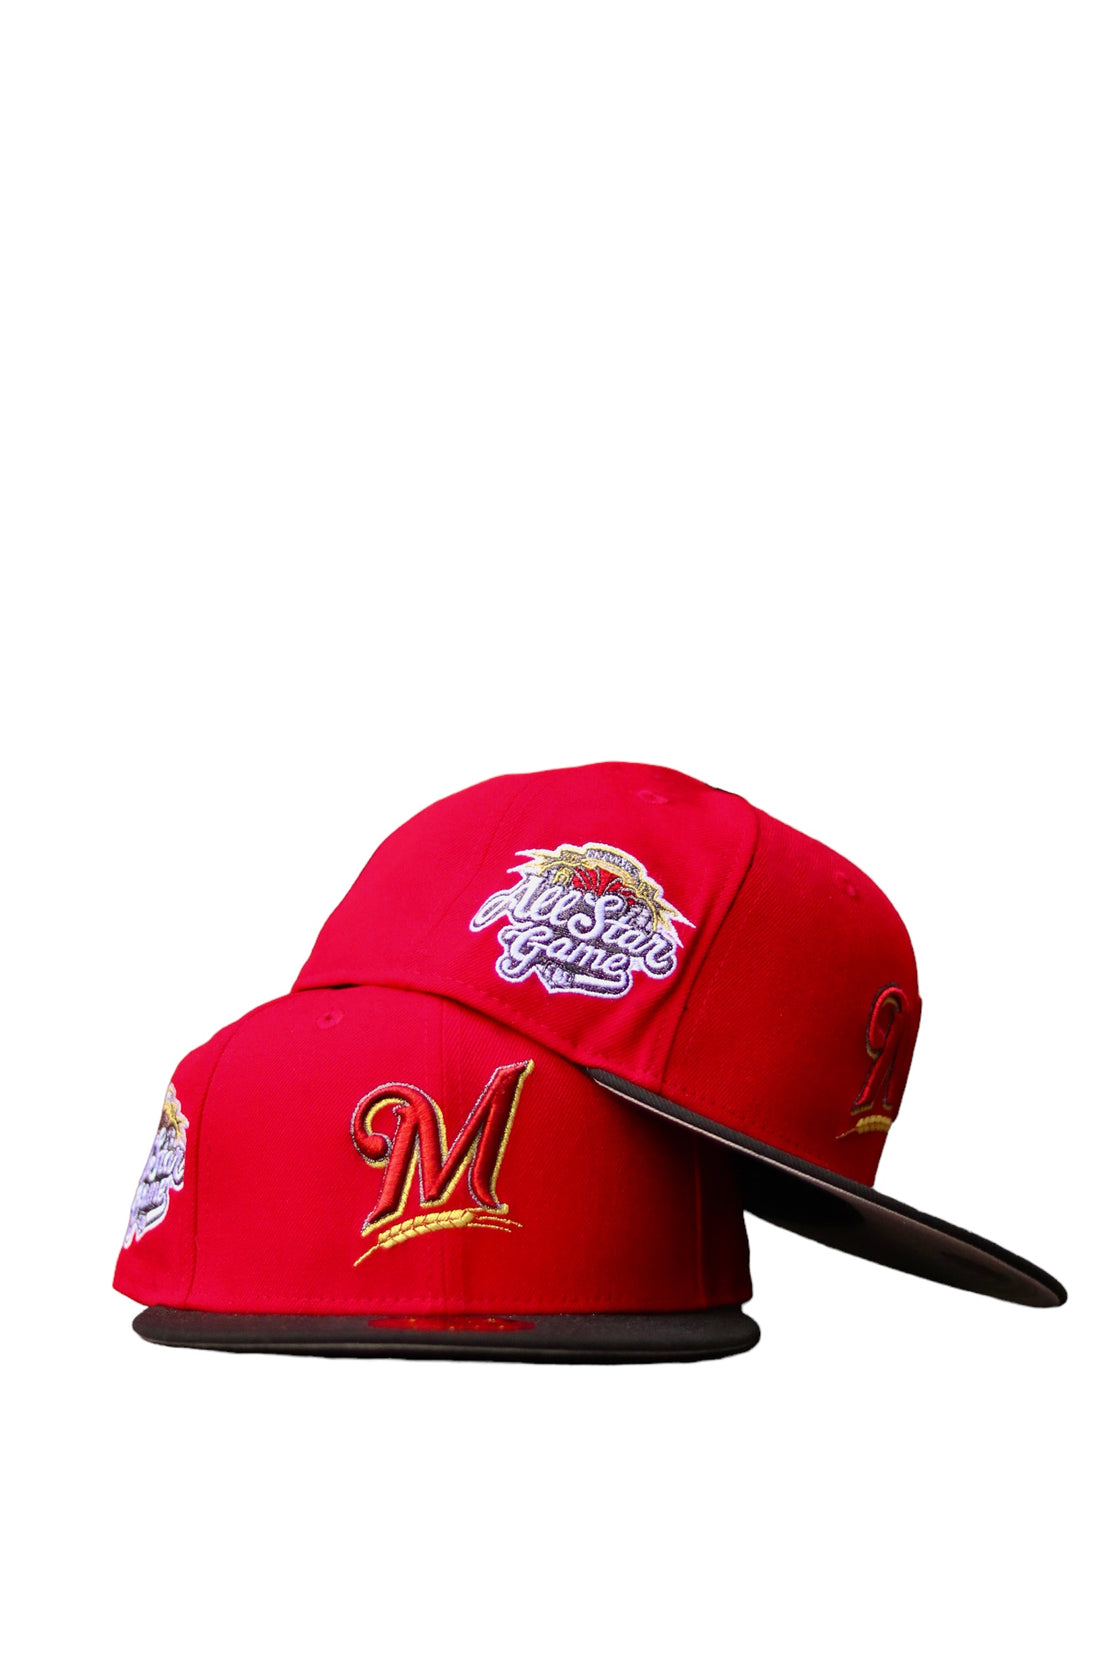 Milwaukee Brewers 2T Red/Black '02 ASG